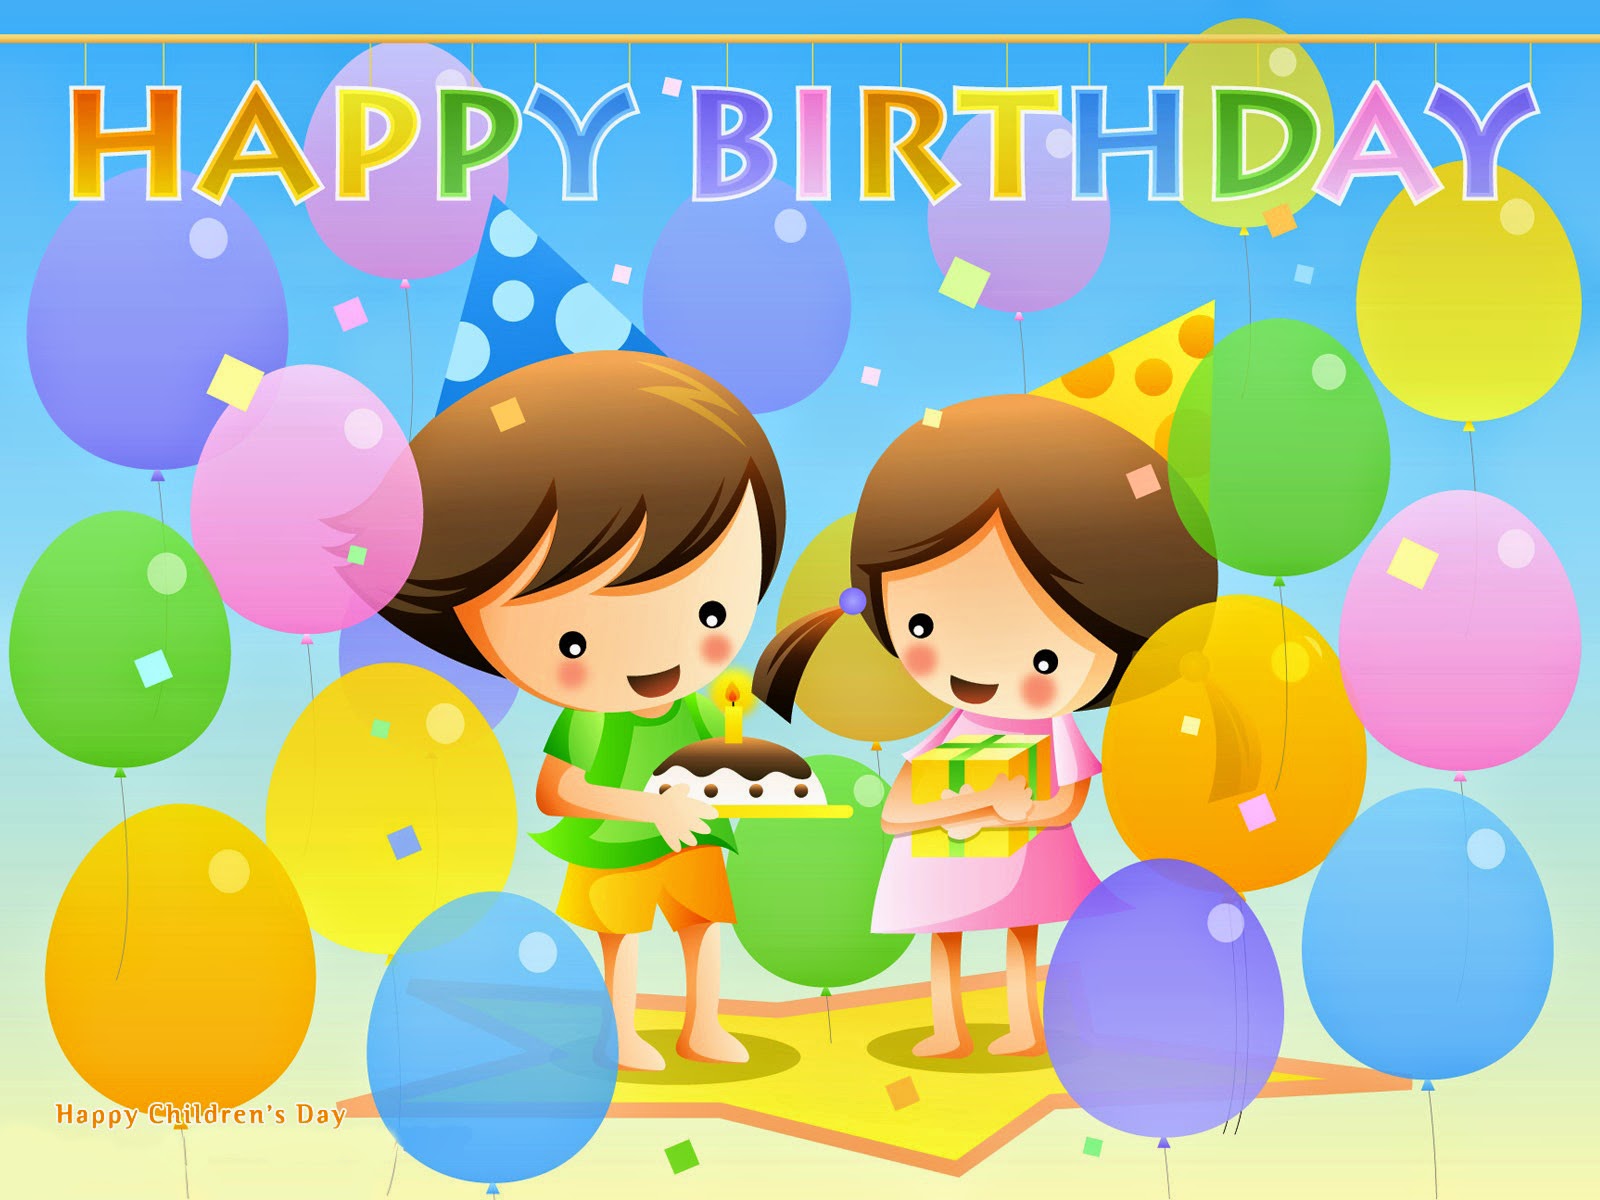 Happy Birthday wishes card images with cakes, candles picture for ...